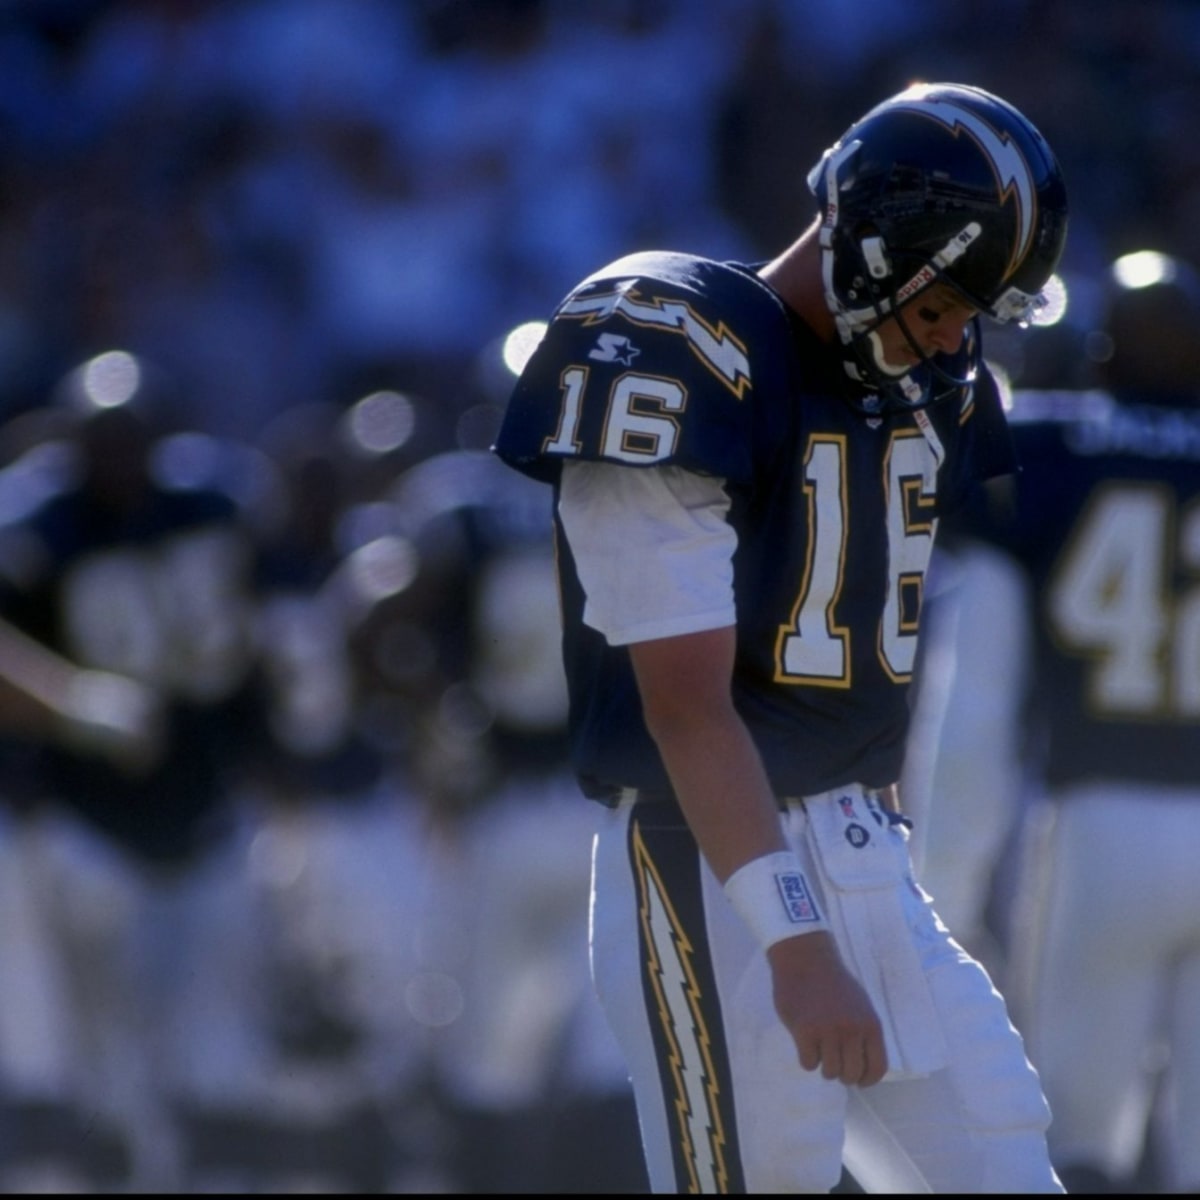 Former Dallas Cowboy Ryan Leaf out of jail and working to help